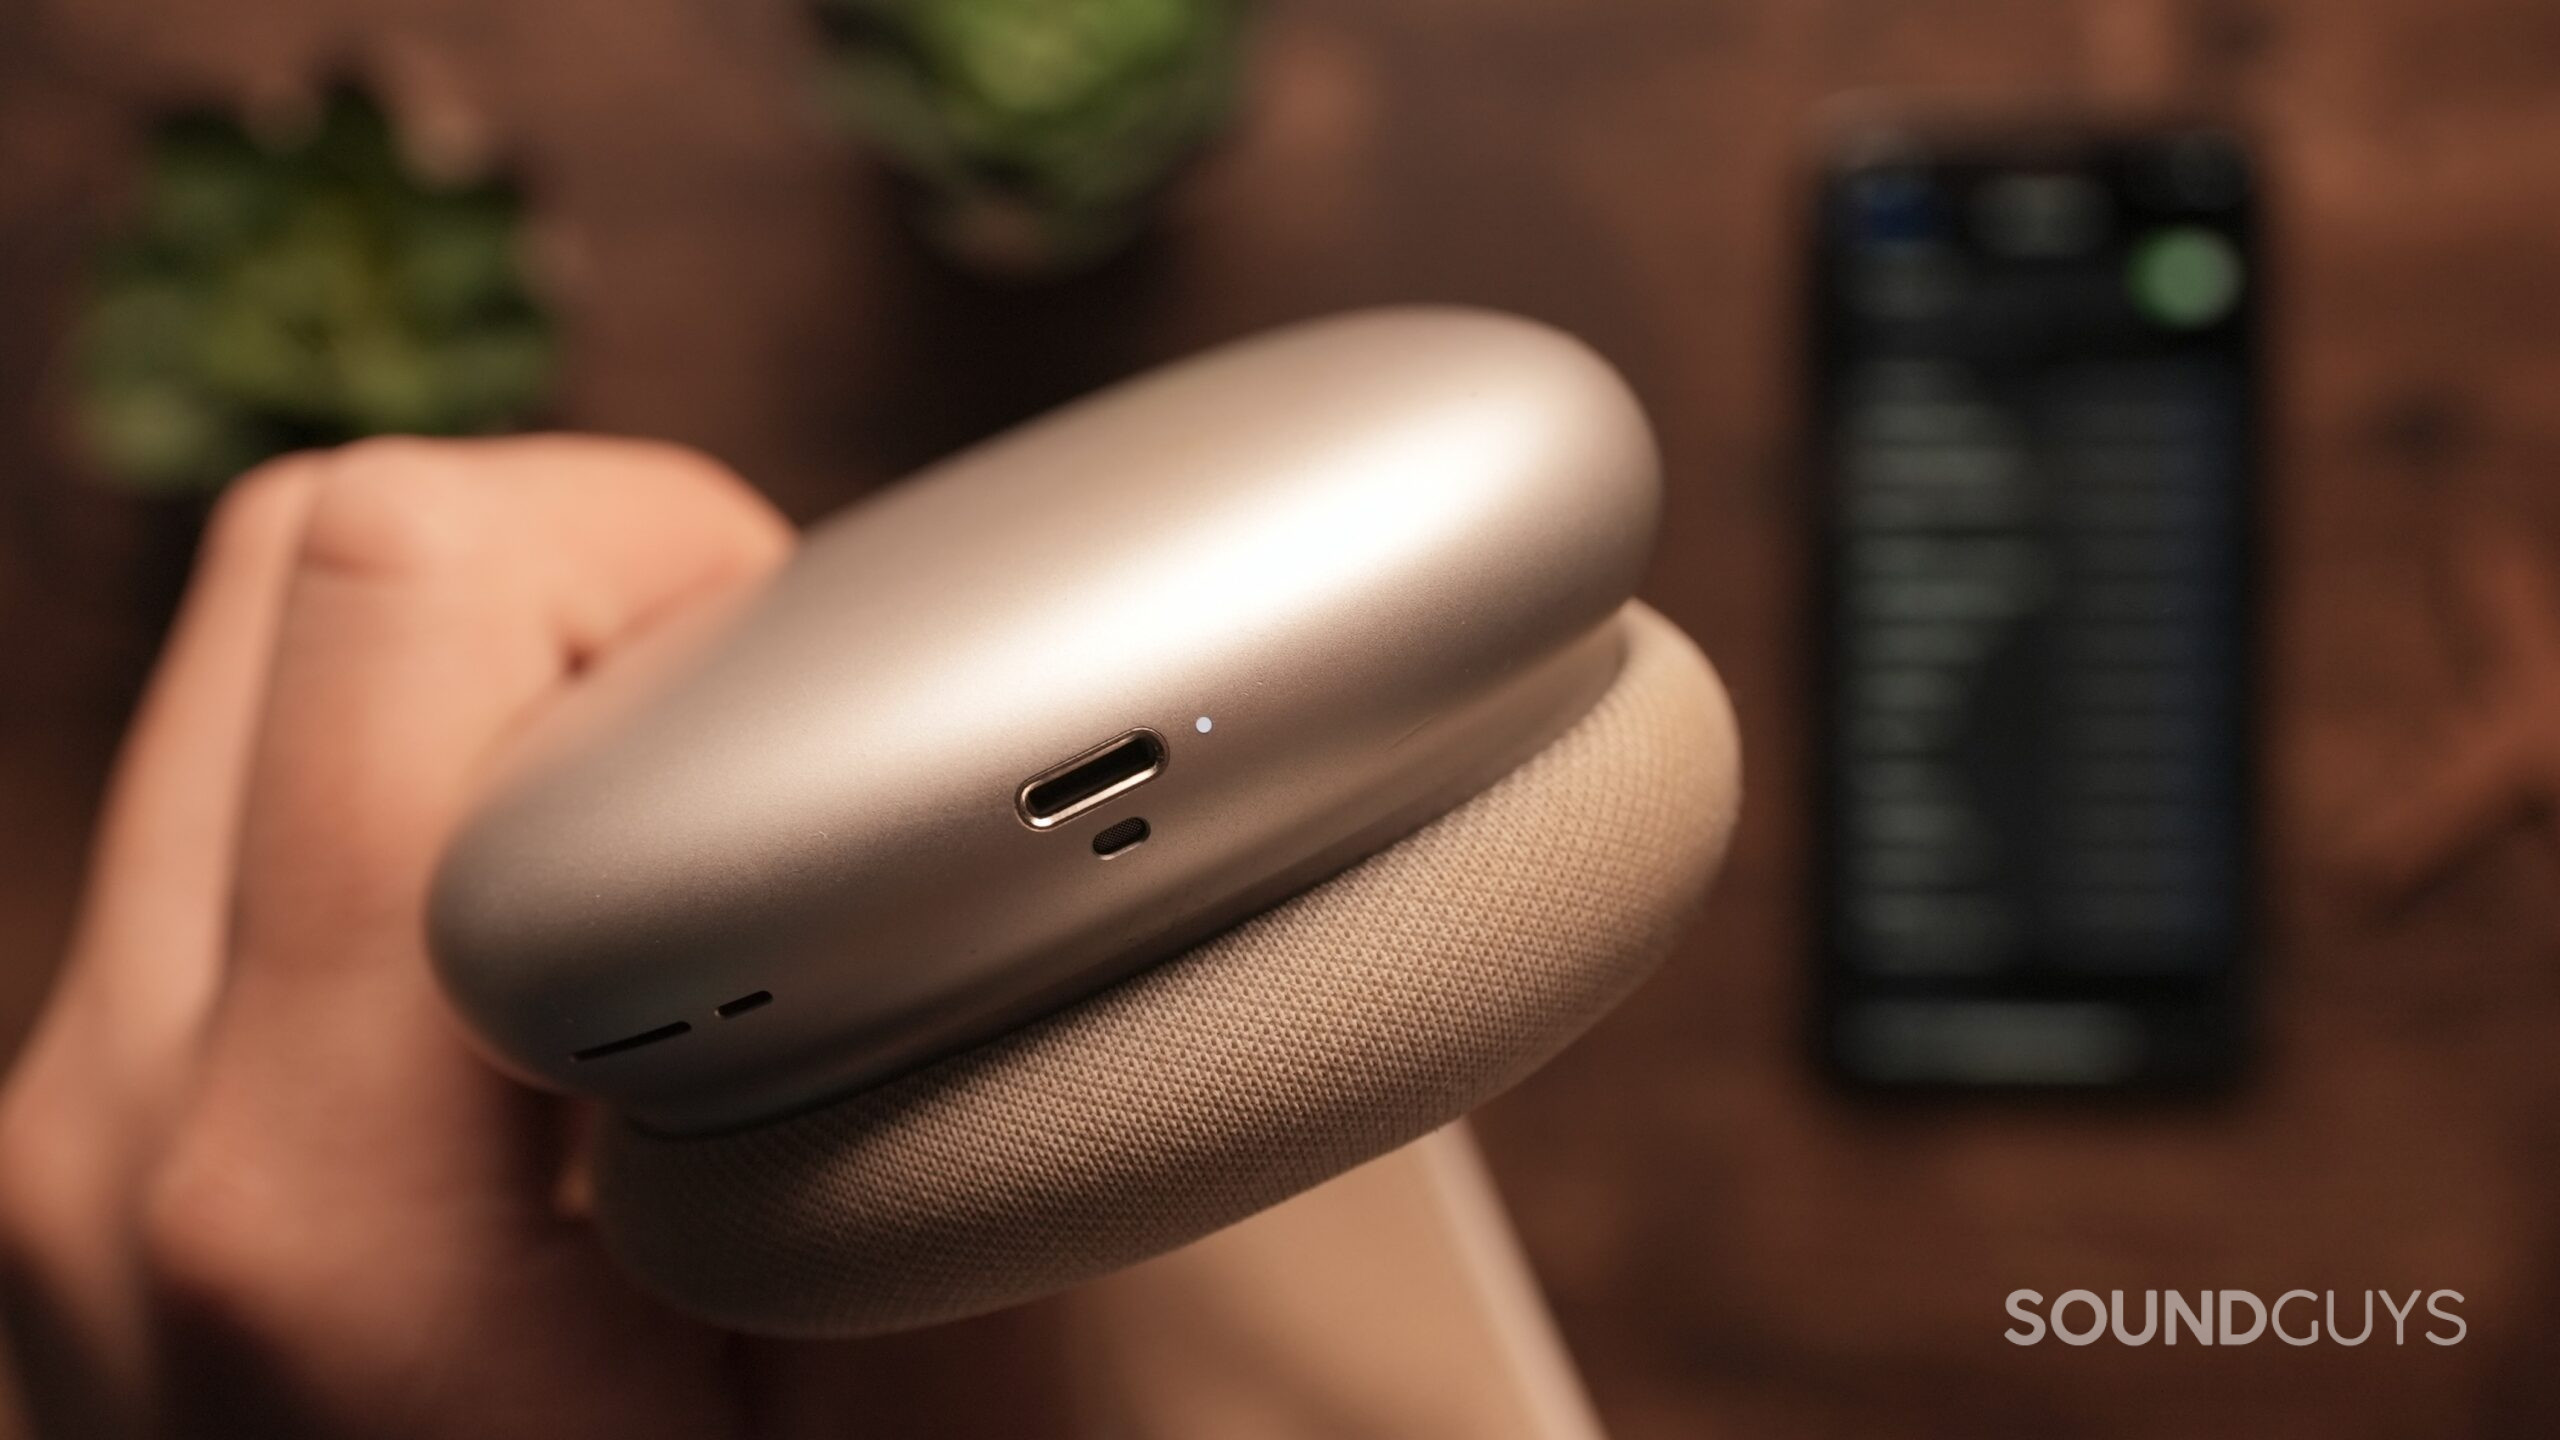 A hand holds the Airpods Max, showing the flashing light.